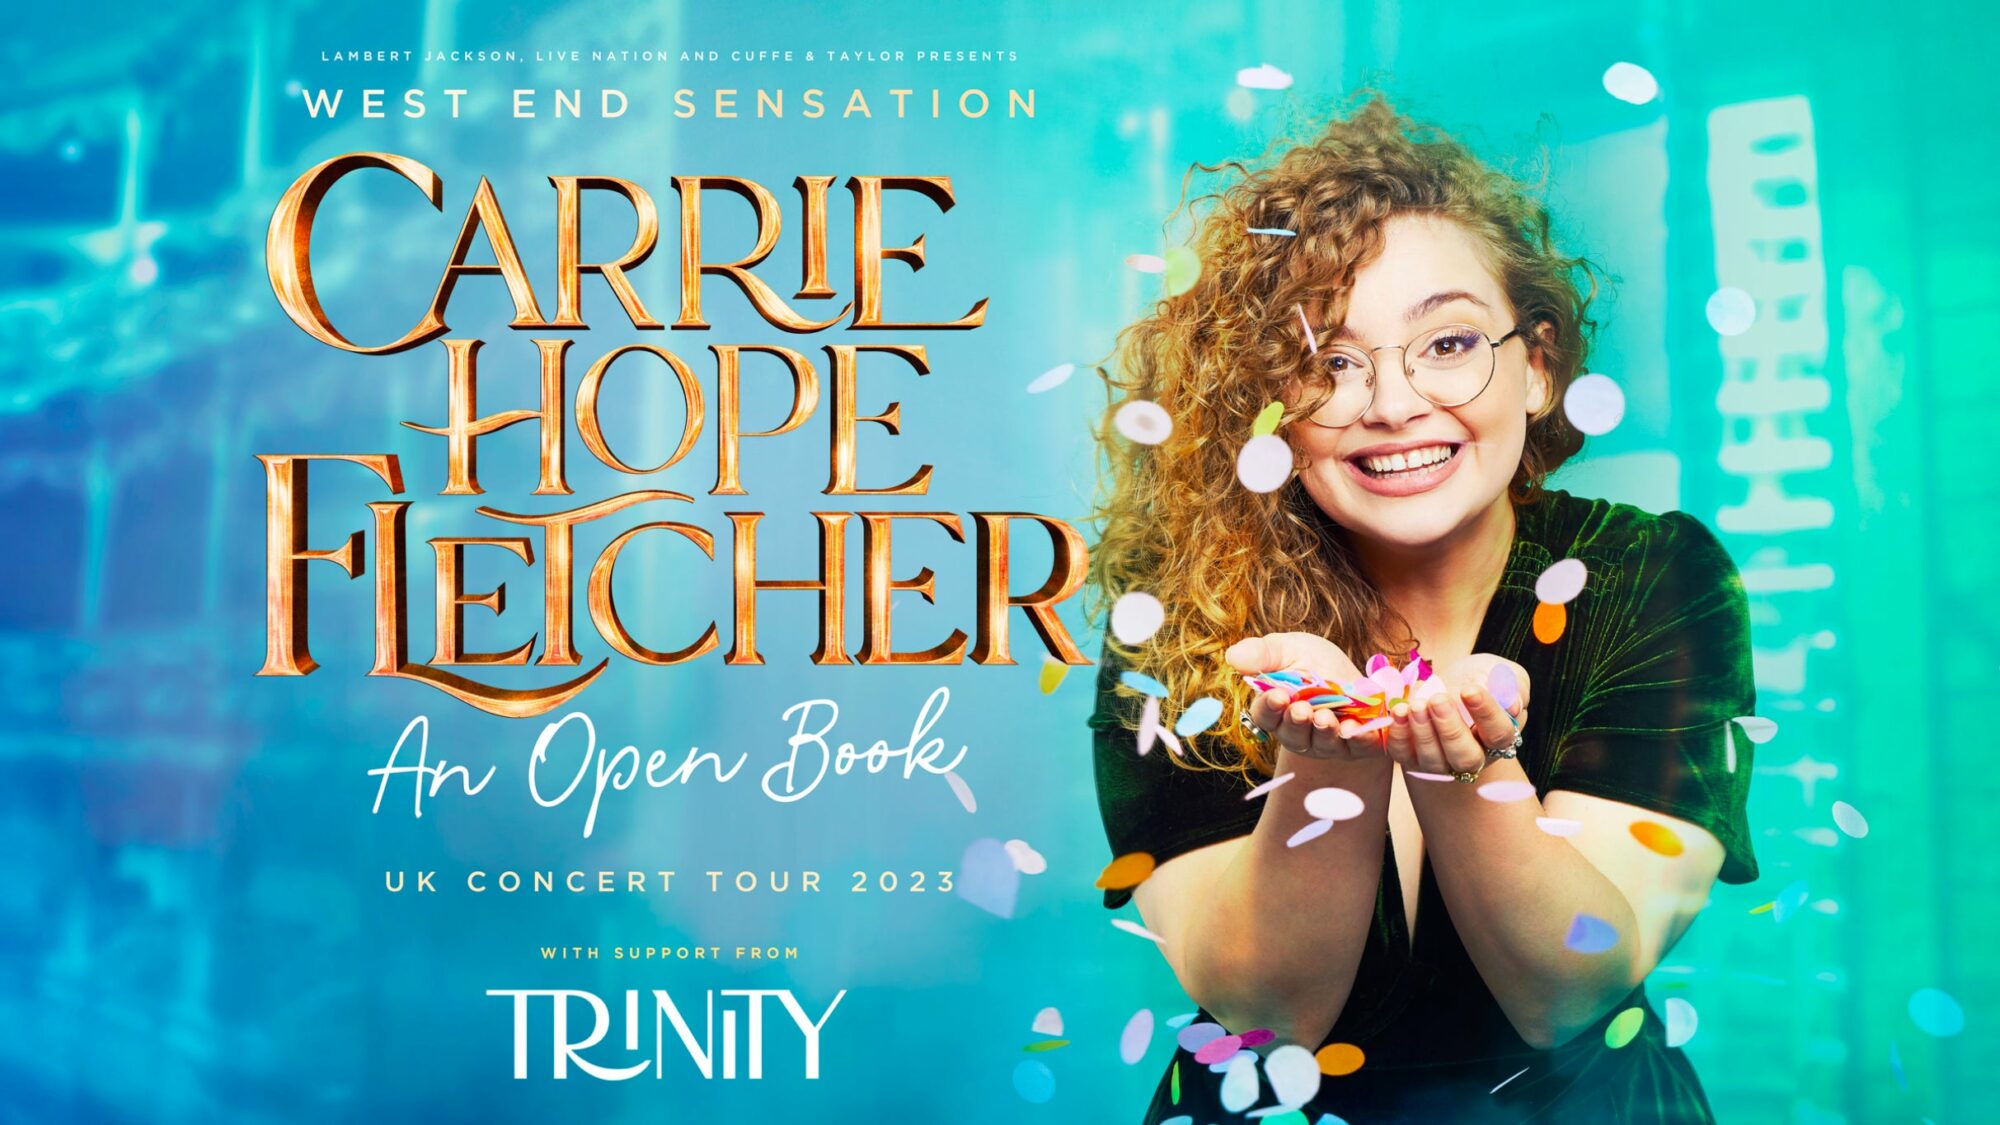 Image name Carrie Hope Fletcher an Open Book at Sheffield City Hall Oval Hall Sheffield 1 the 1 image from the post Carrie Hope Fletcher - an Open Book at St Georges Hall, Bradford, Bradford in Yorkshire.com.